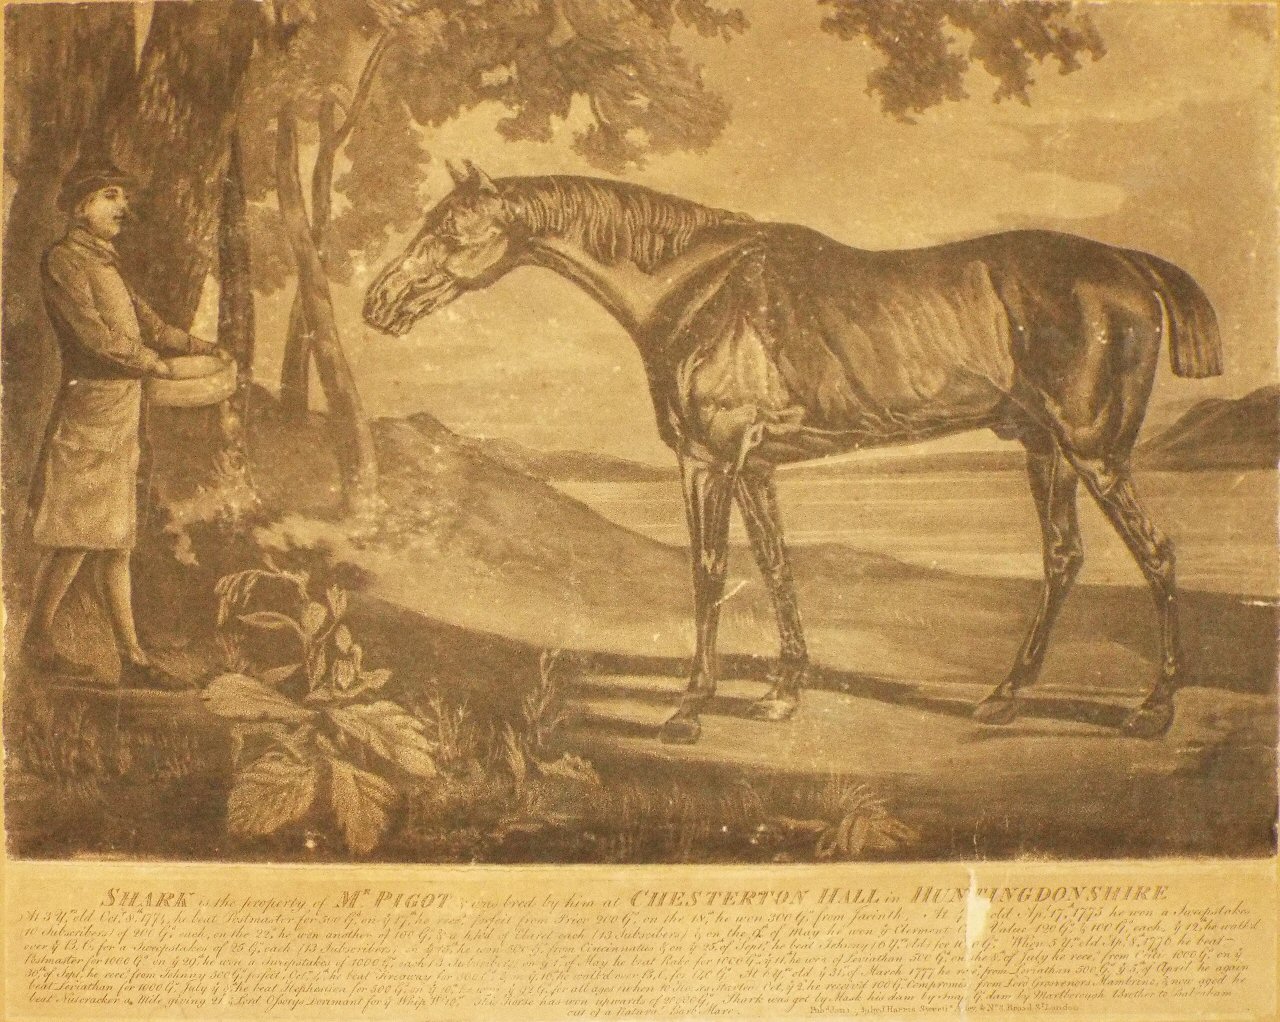 Mezzotint - Shark is the Property of Mr. Pigot & was bred by him at Chesterton Hall in Huntingdonshire - Stubbs